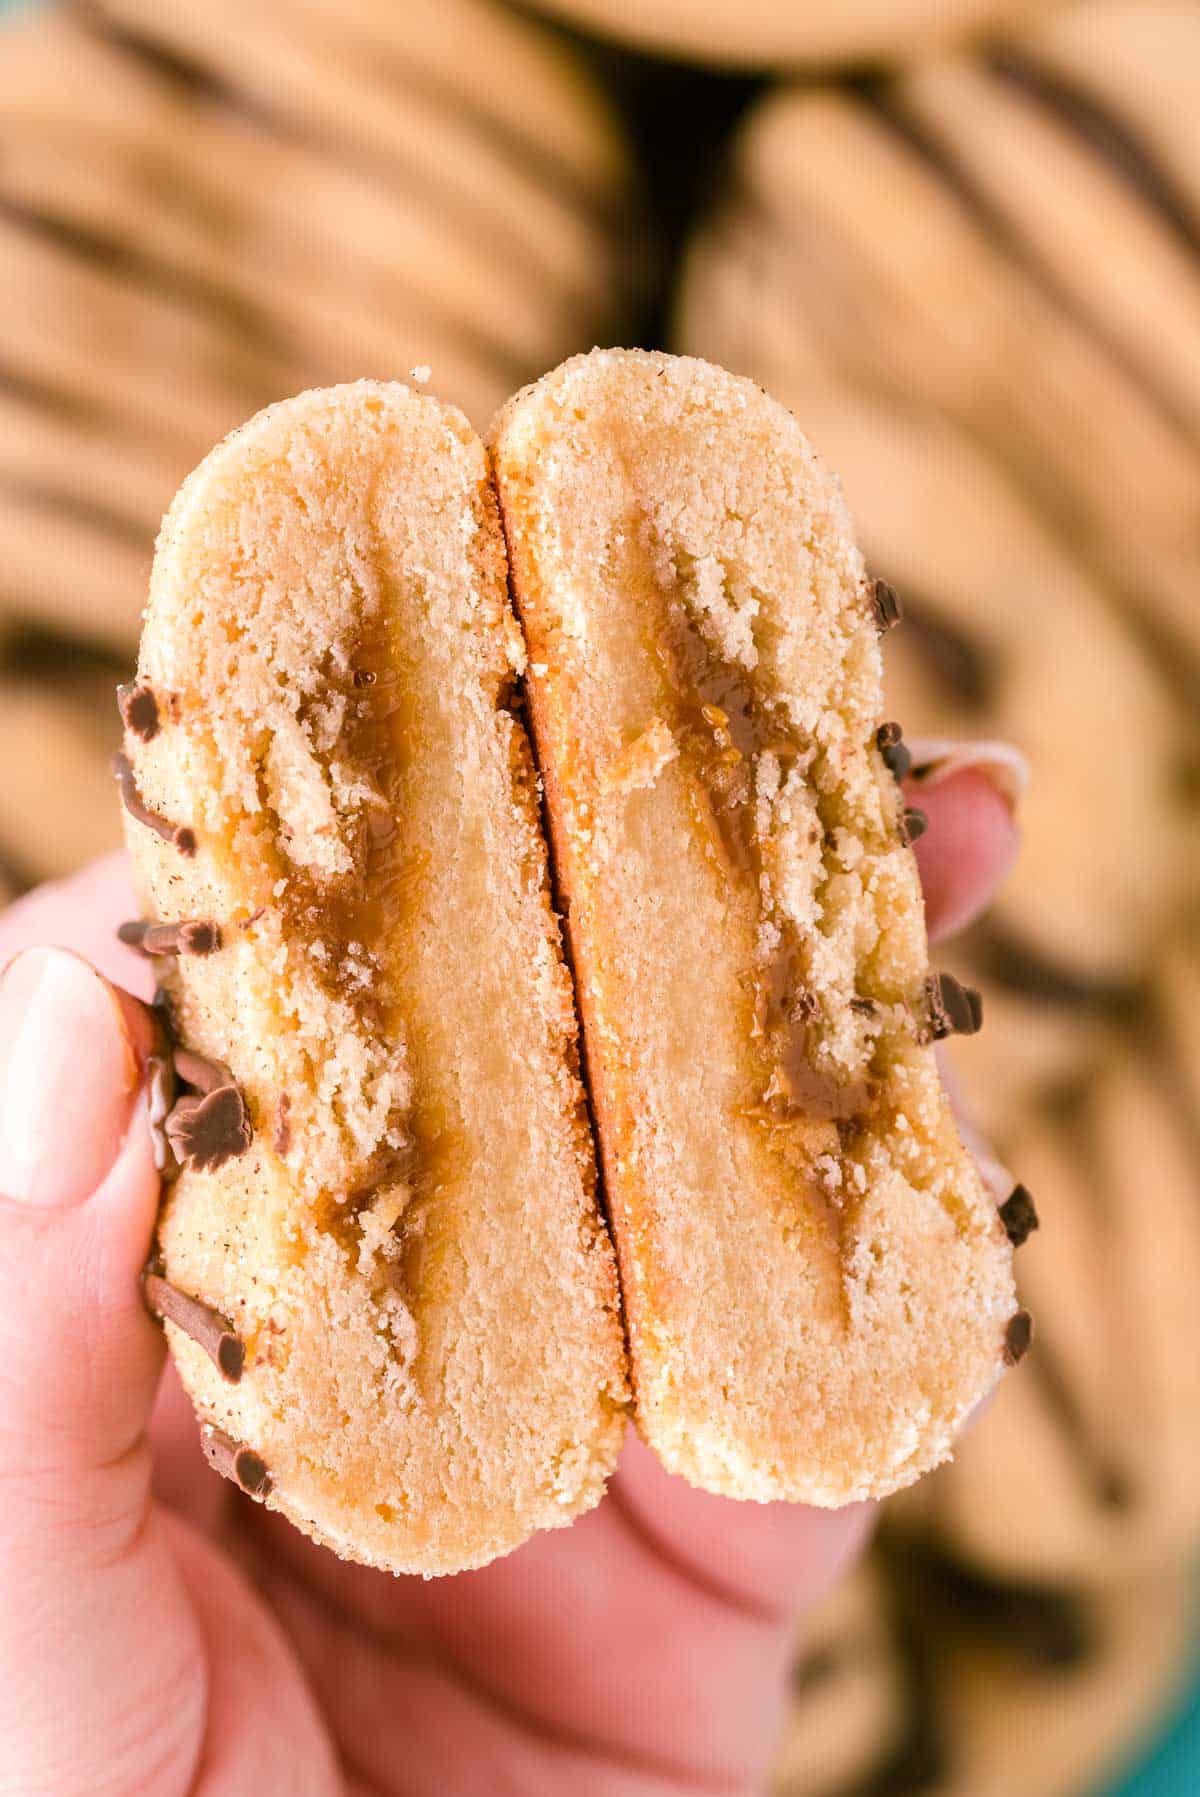 A woman's hand holding a churro cookie that's been cut in half.